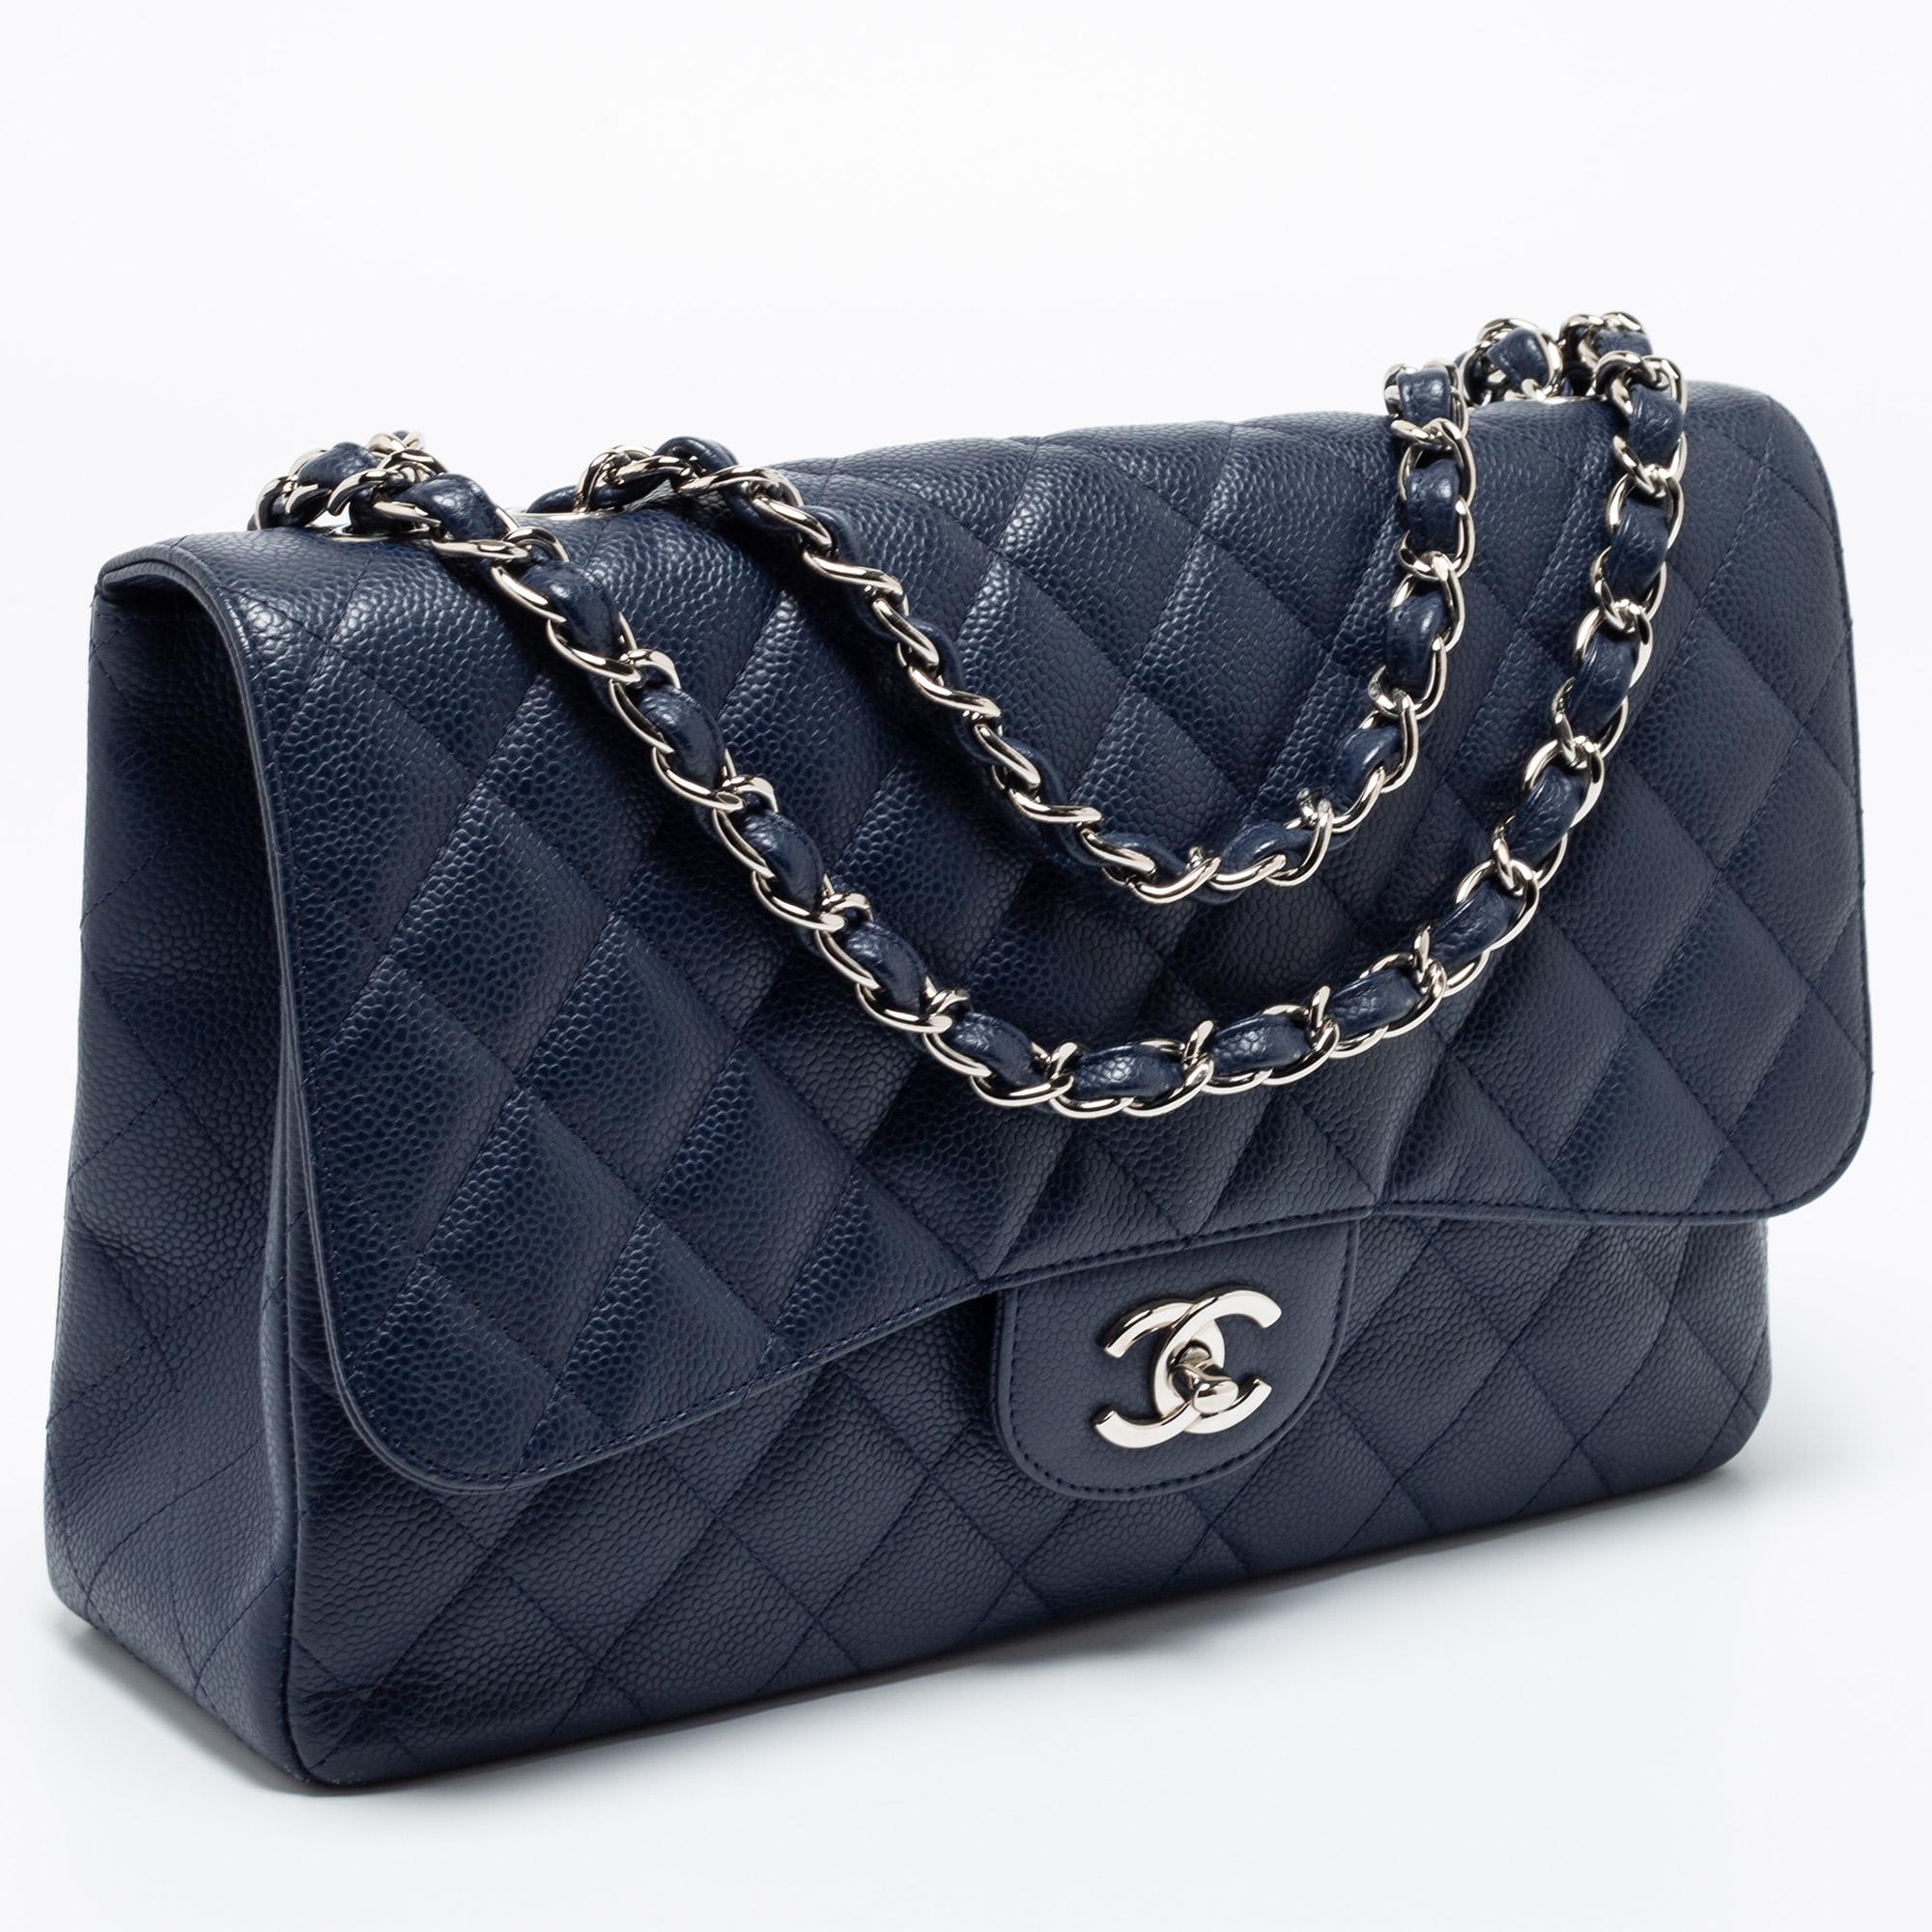 Women's Chanel Blue Quilted Leather Jumbo Classic Flap Bag